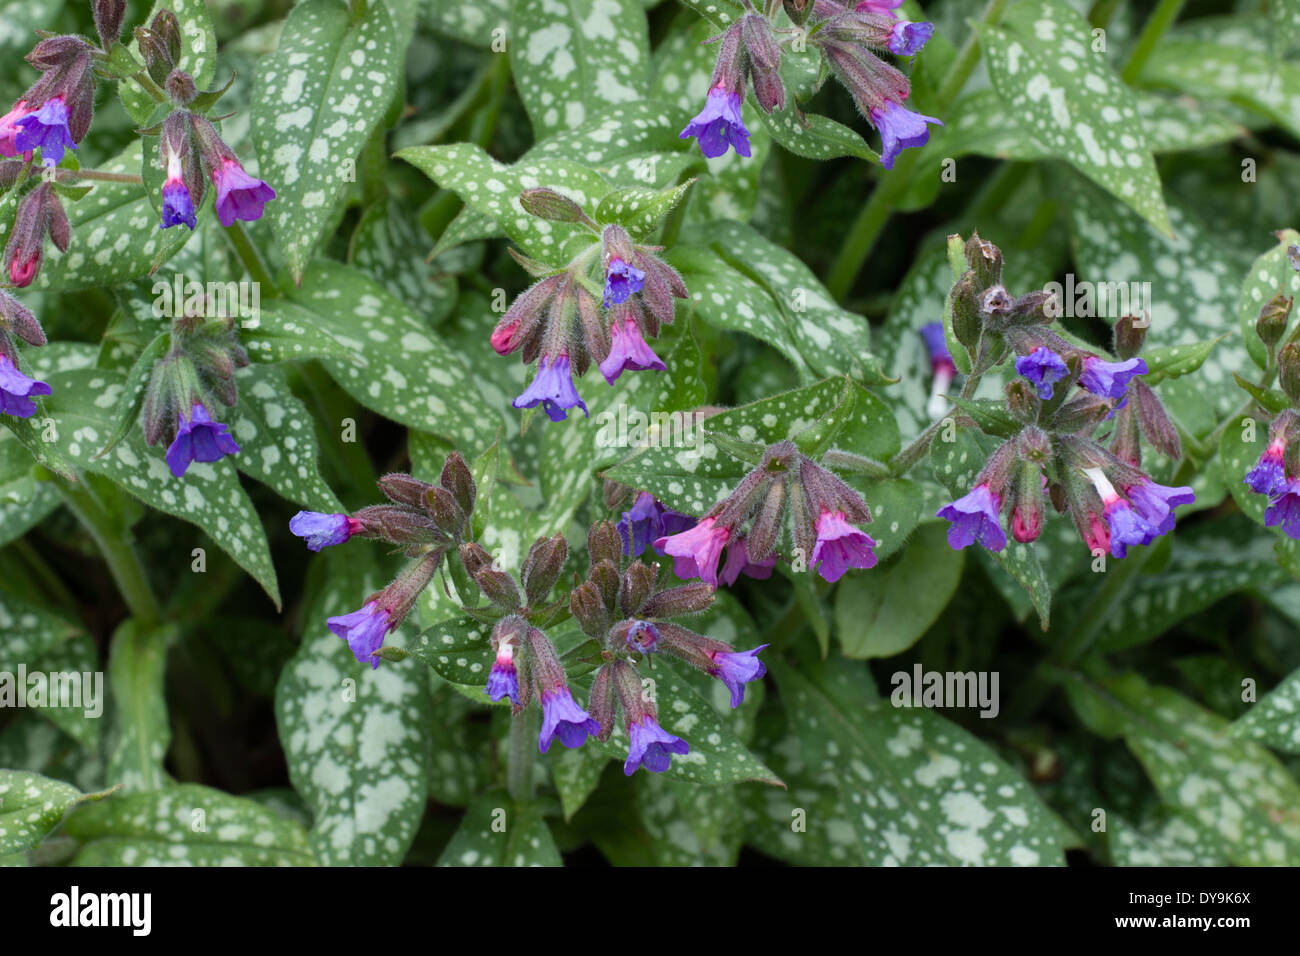 Early spring flowers and spotted leaves of the lungwort, Pulmonaria saccharata 'Trevi Fountain' Stock Photo